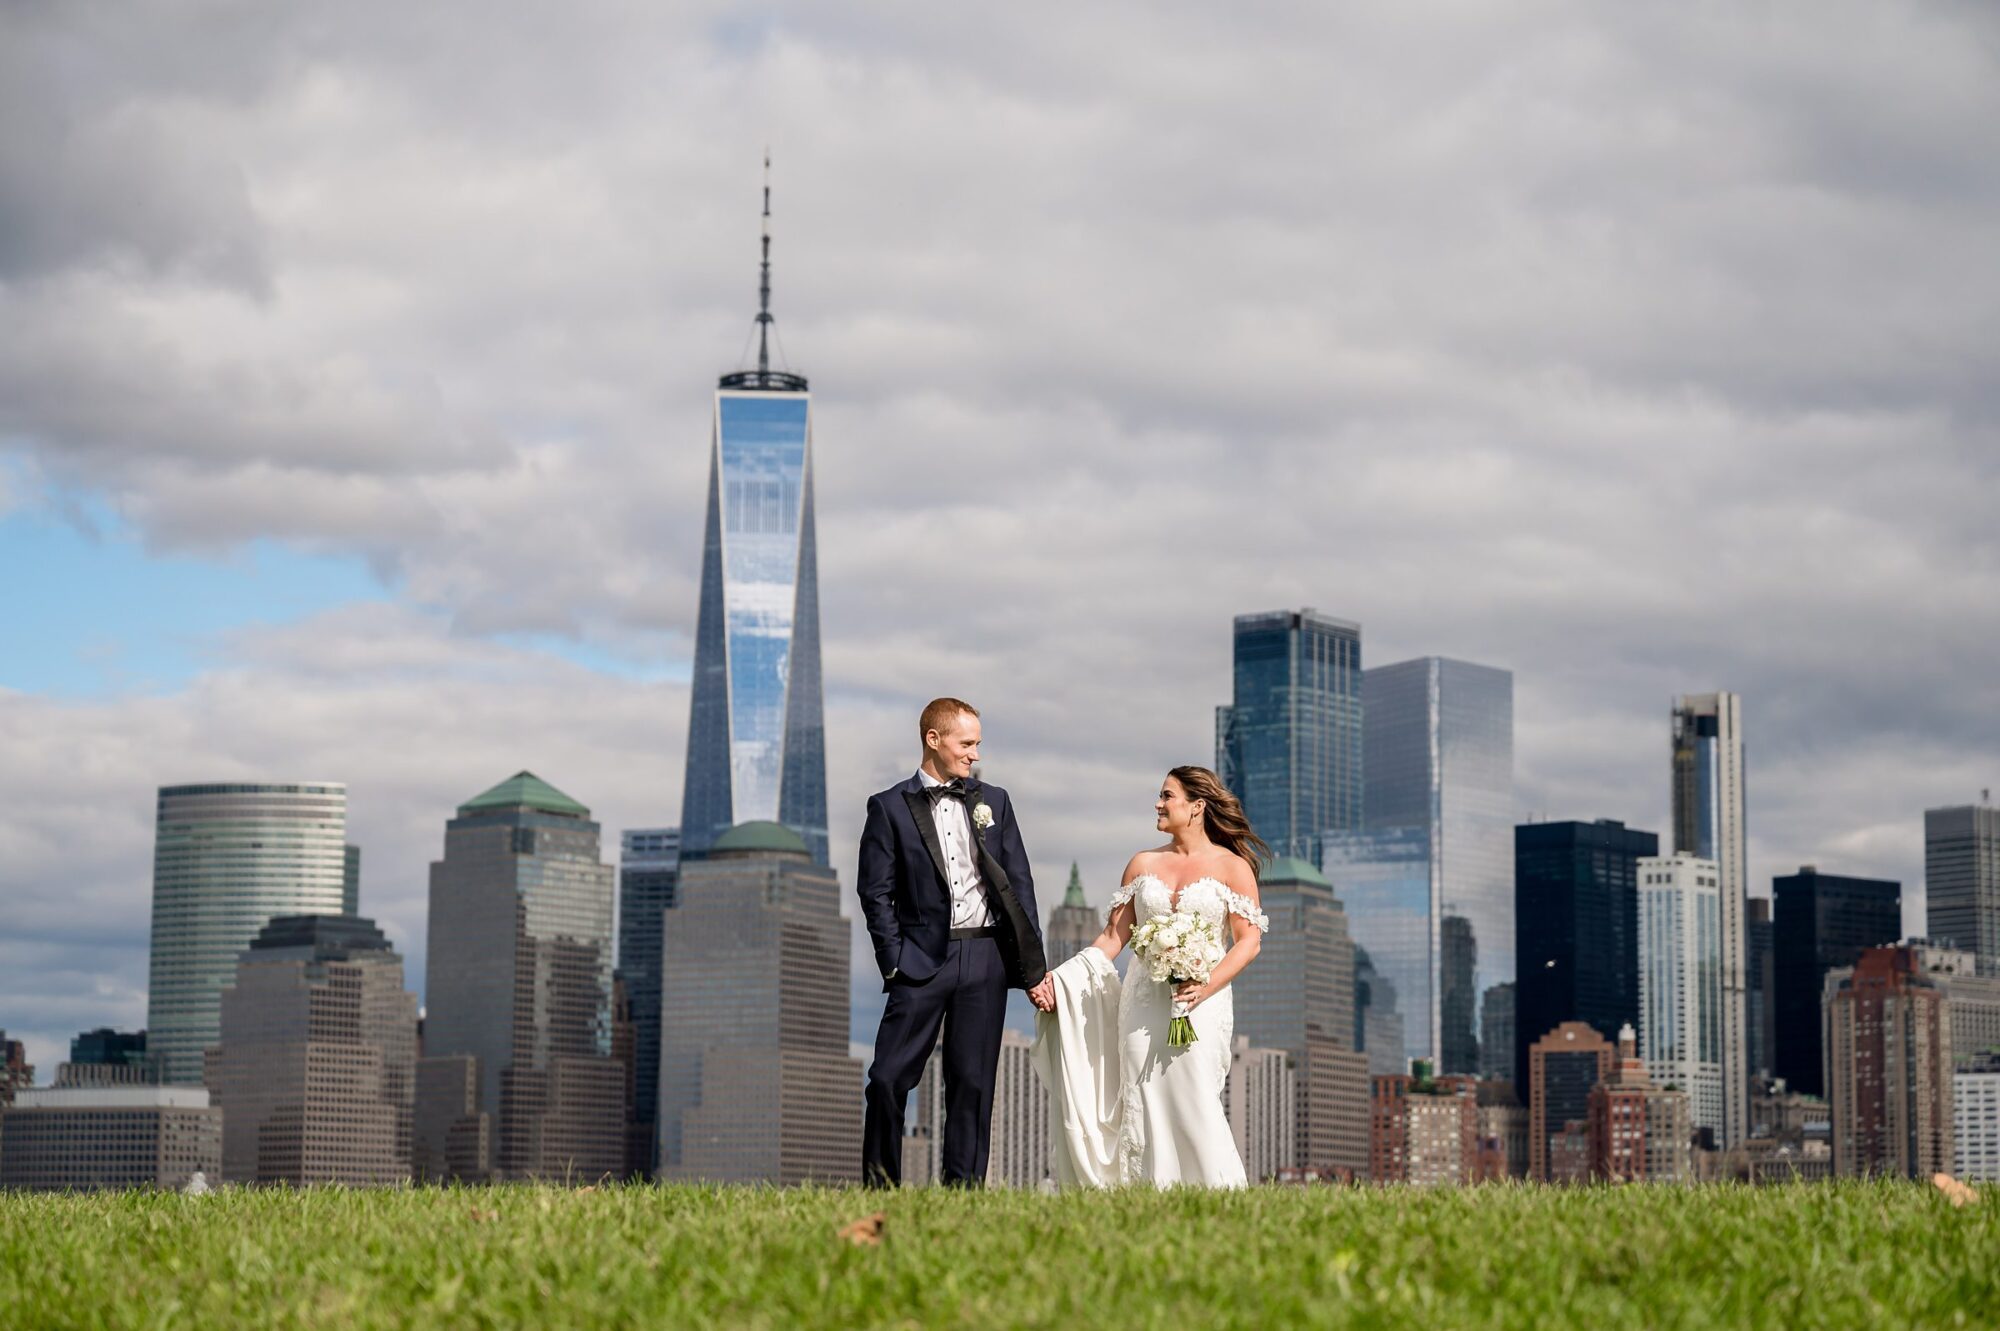 A bride and groom standing in the grass with the NYC skyline in the background.